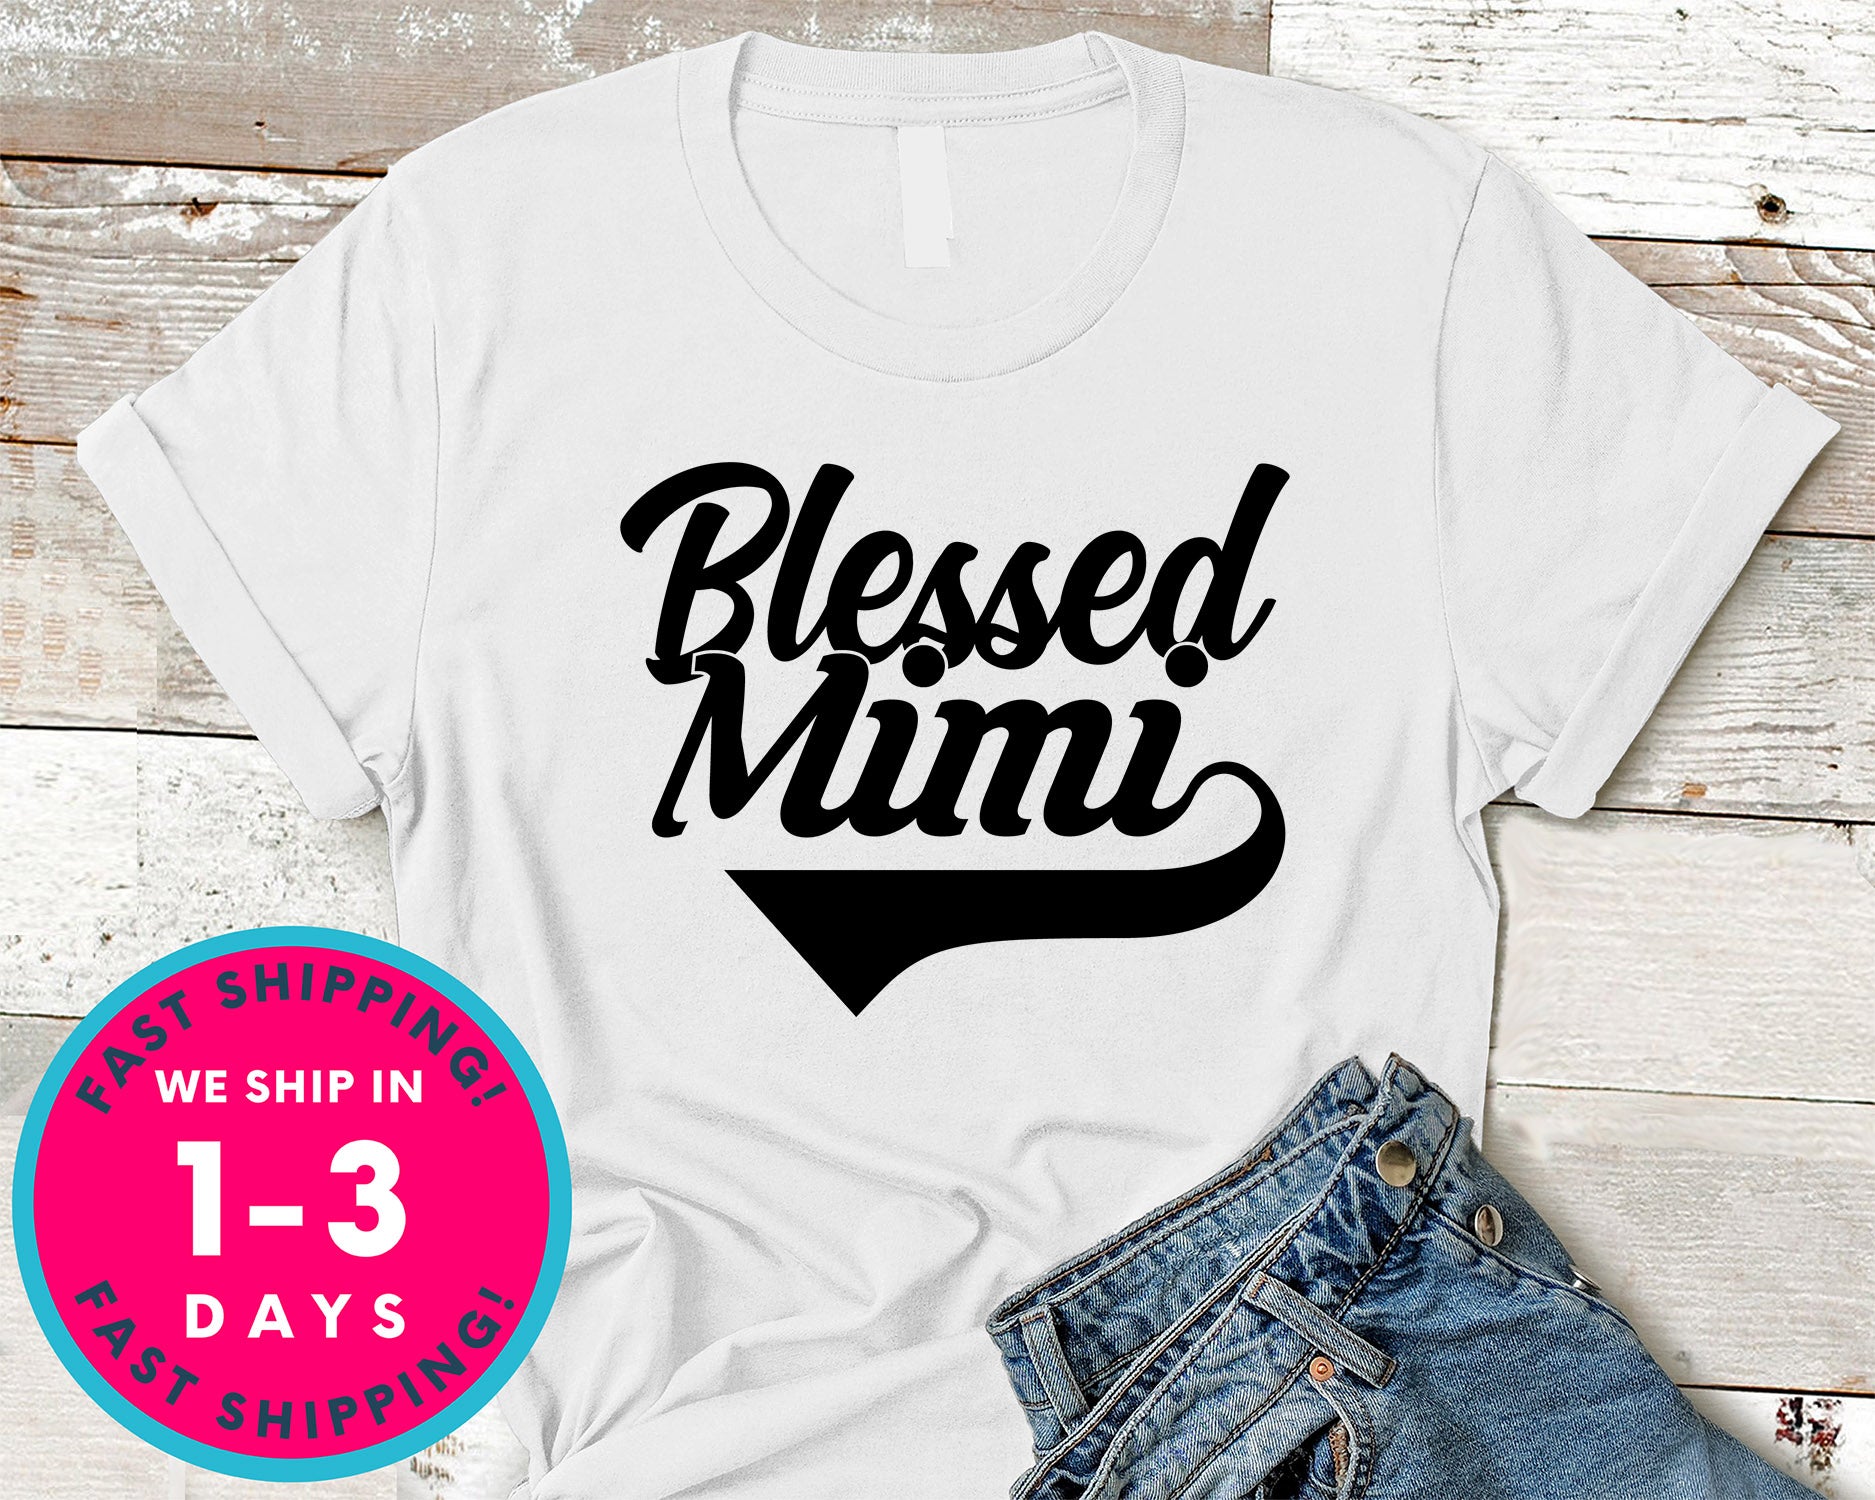 Blessed Mimi